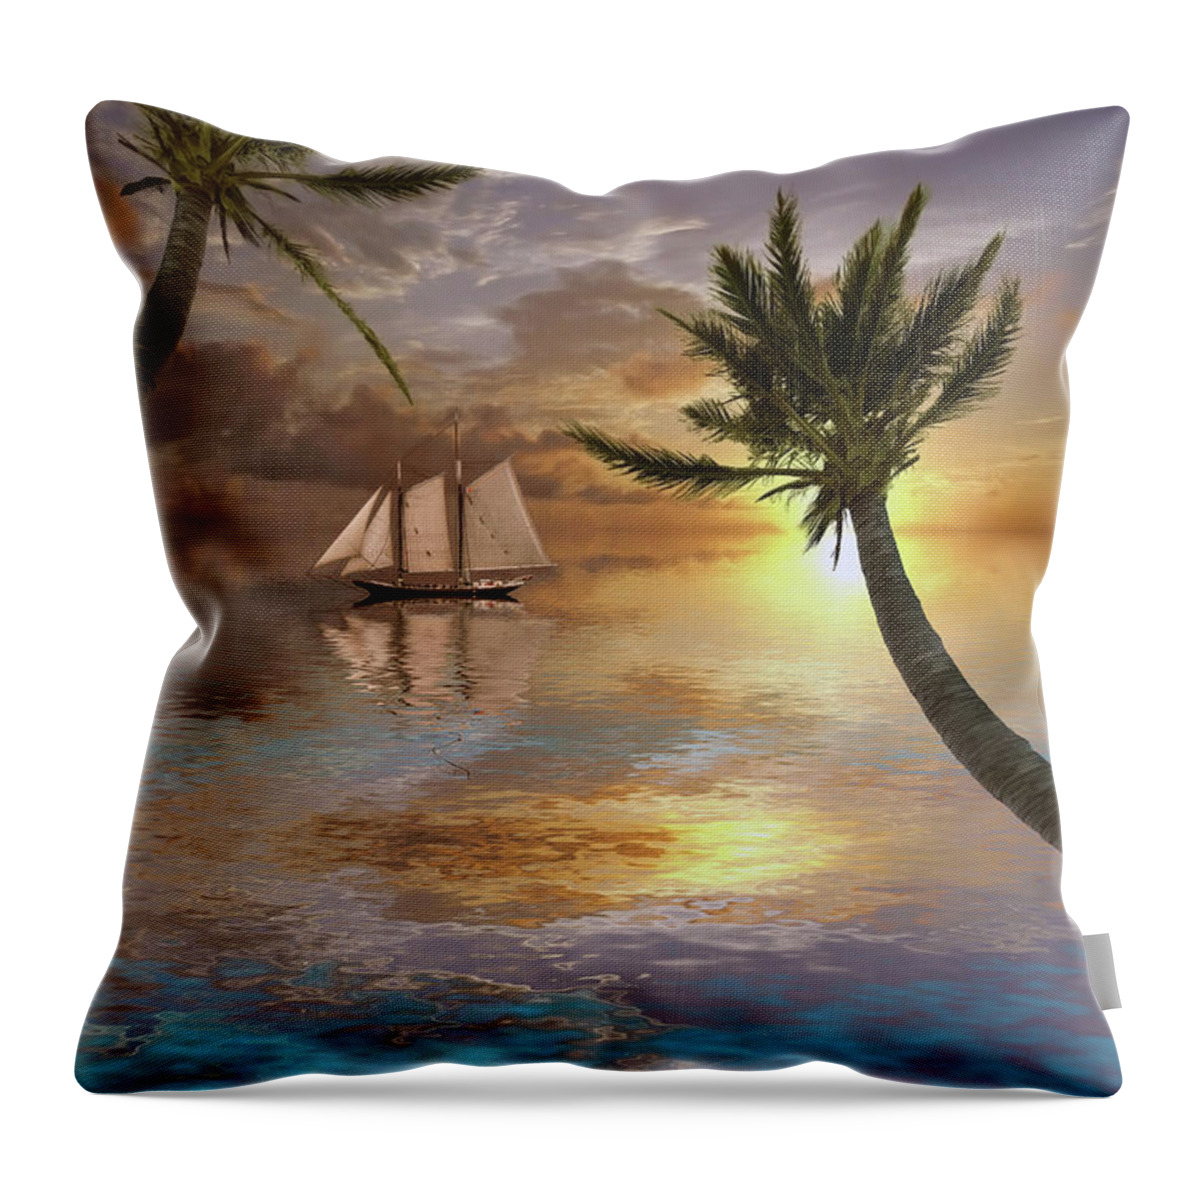 Sailboat Throw Pillow featuring the digital art Tropical waters by Bruce Rolff